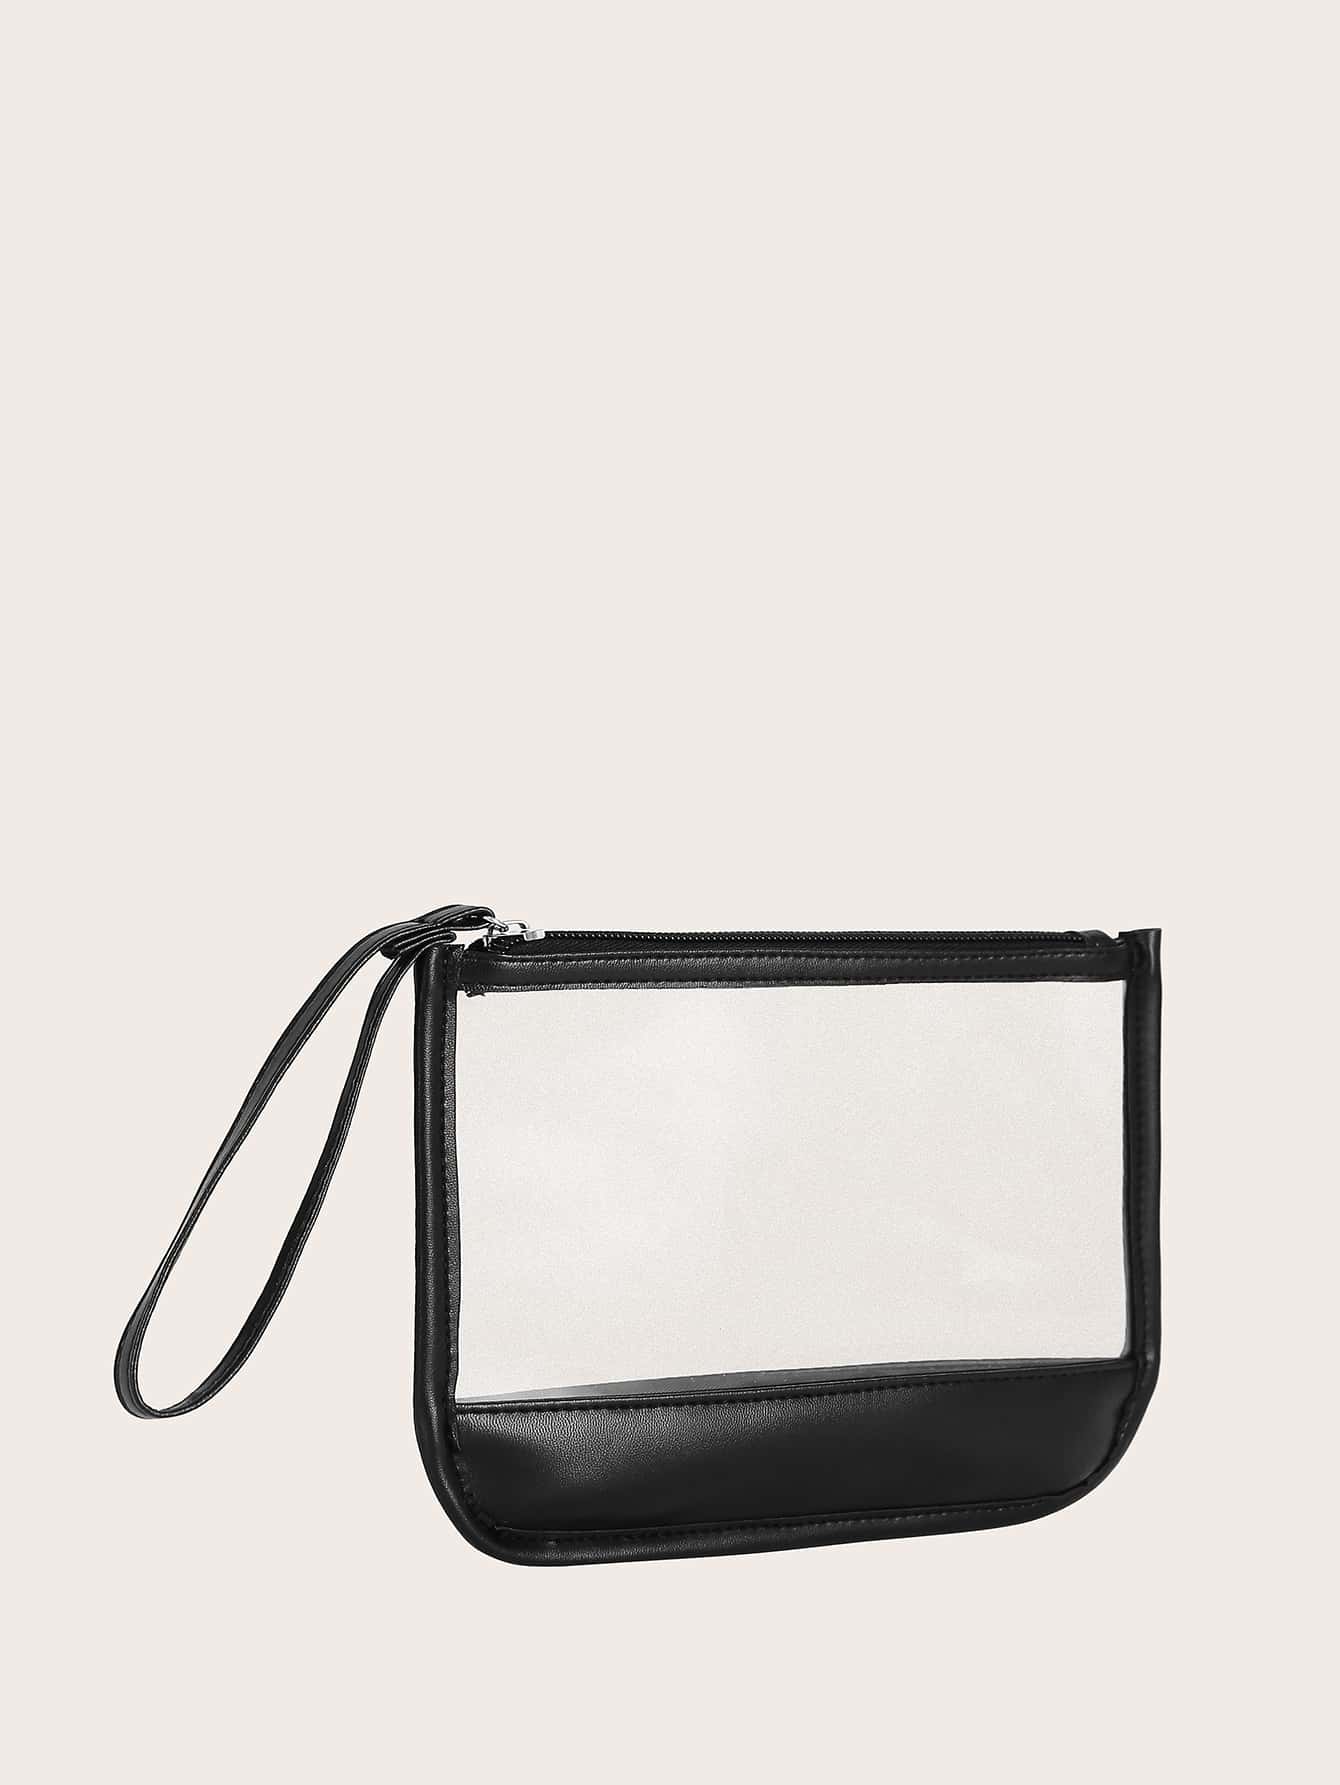 Clear Clutch Bag With Wristlet